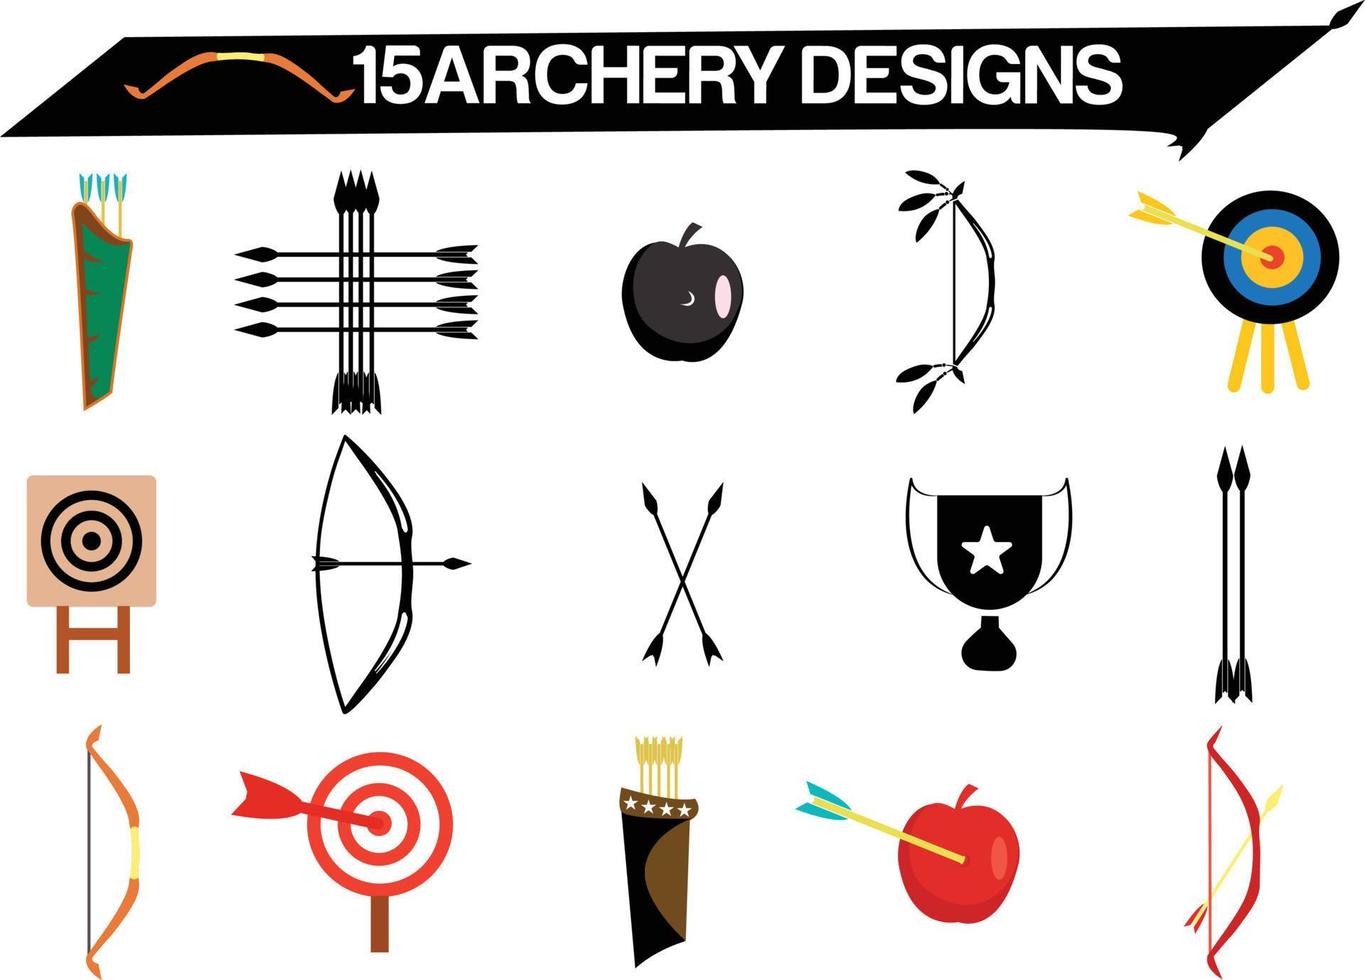 Different archery elements vector illustrations set. Equipment for archery, different bows, arrows, targets, apple isolated on white background. Sports, archery concept for game design